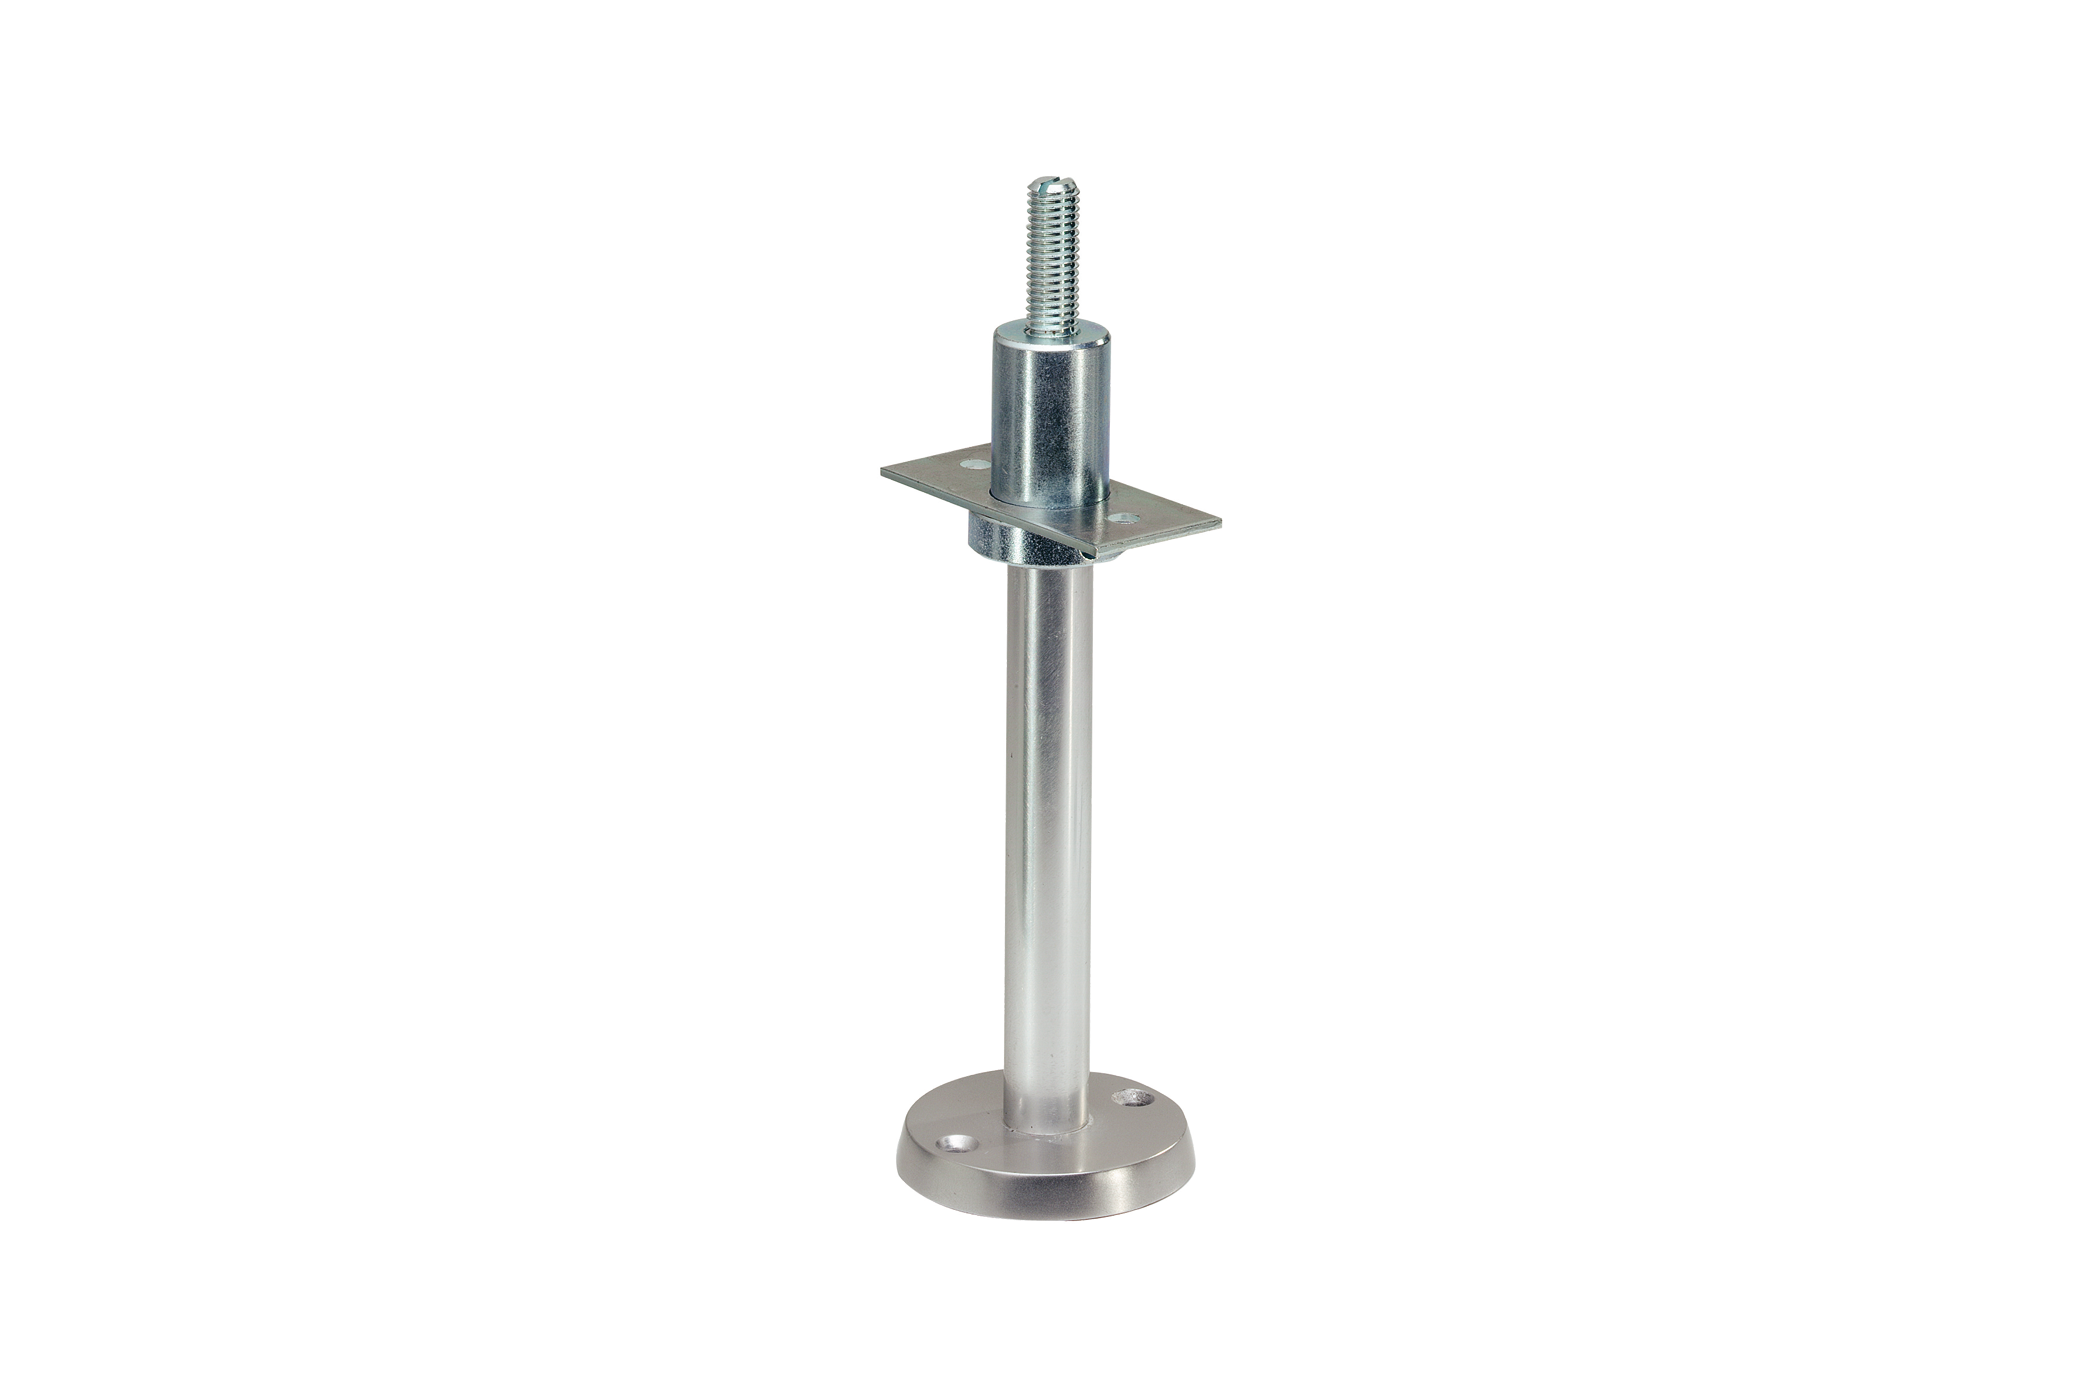 KWS Partition support 4102 in finish 31 (aluminium, KWS 1 silver anodised)